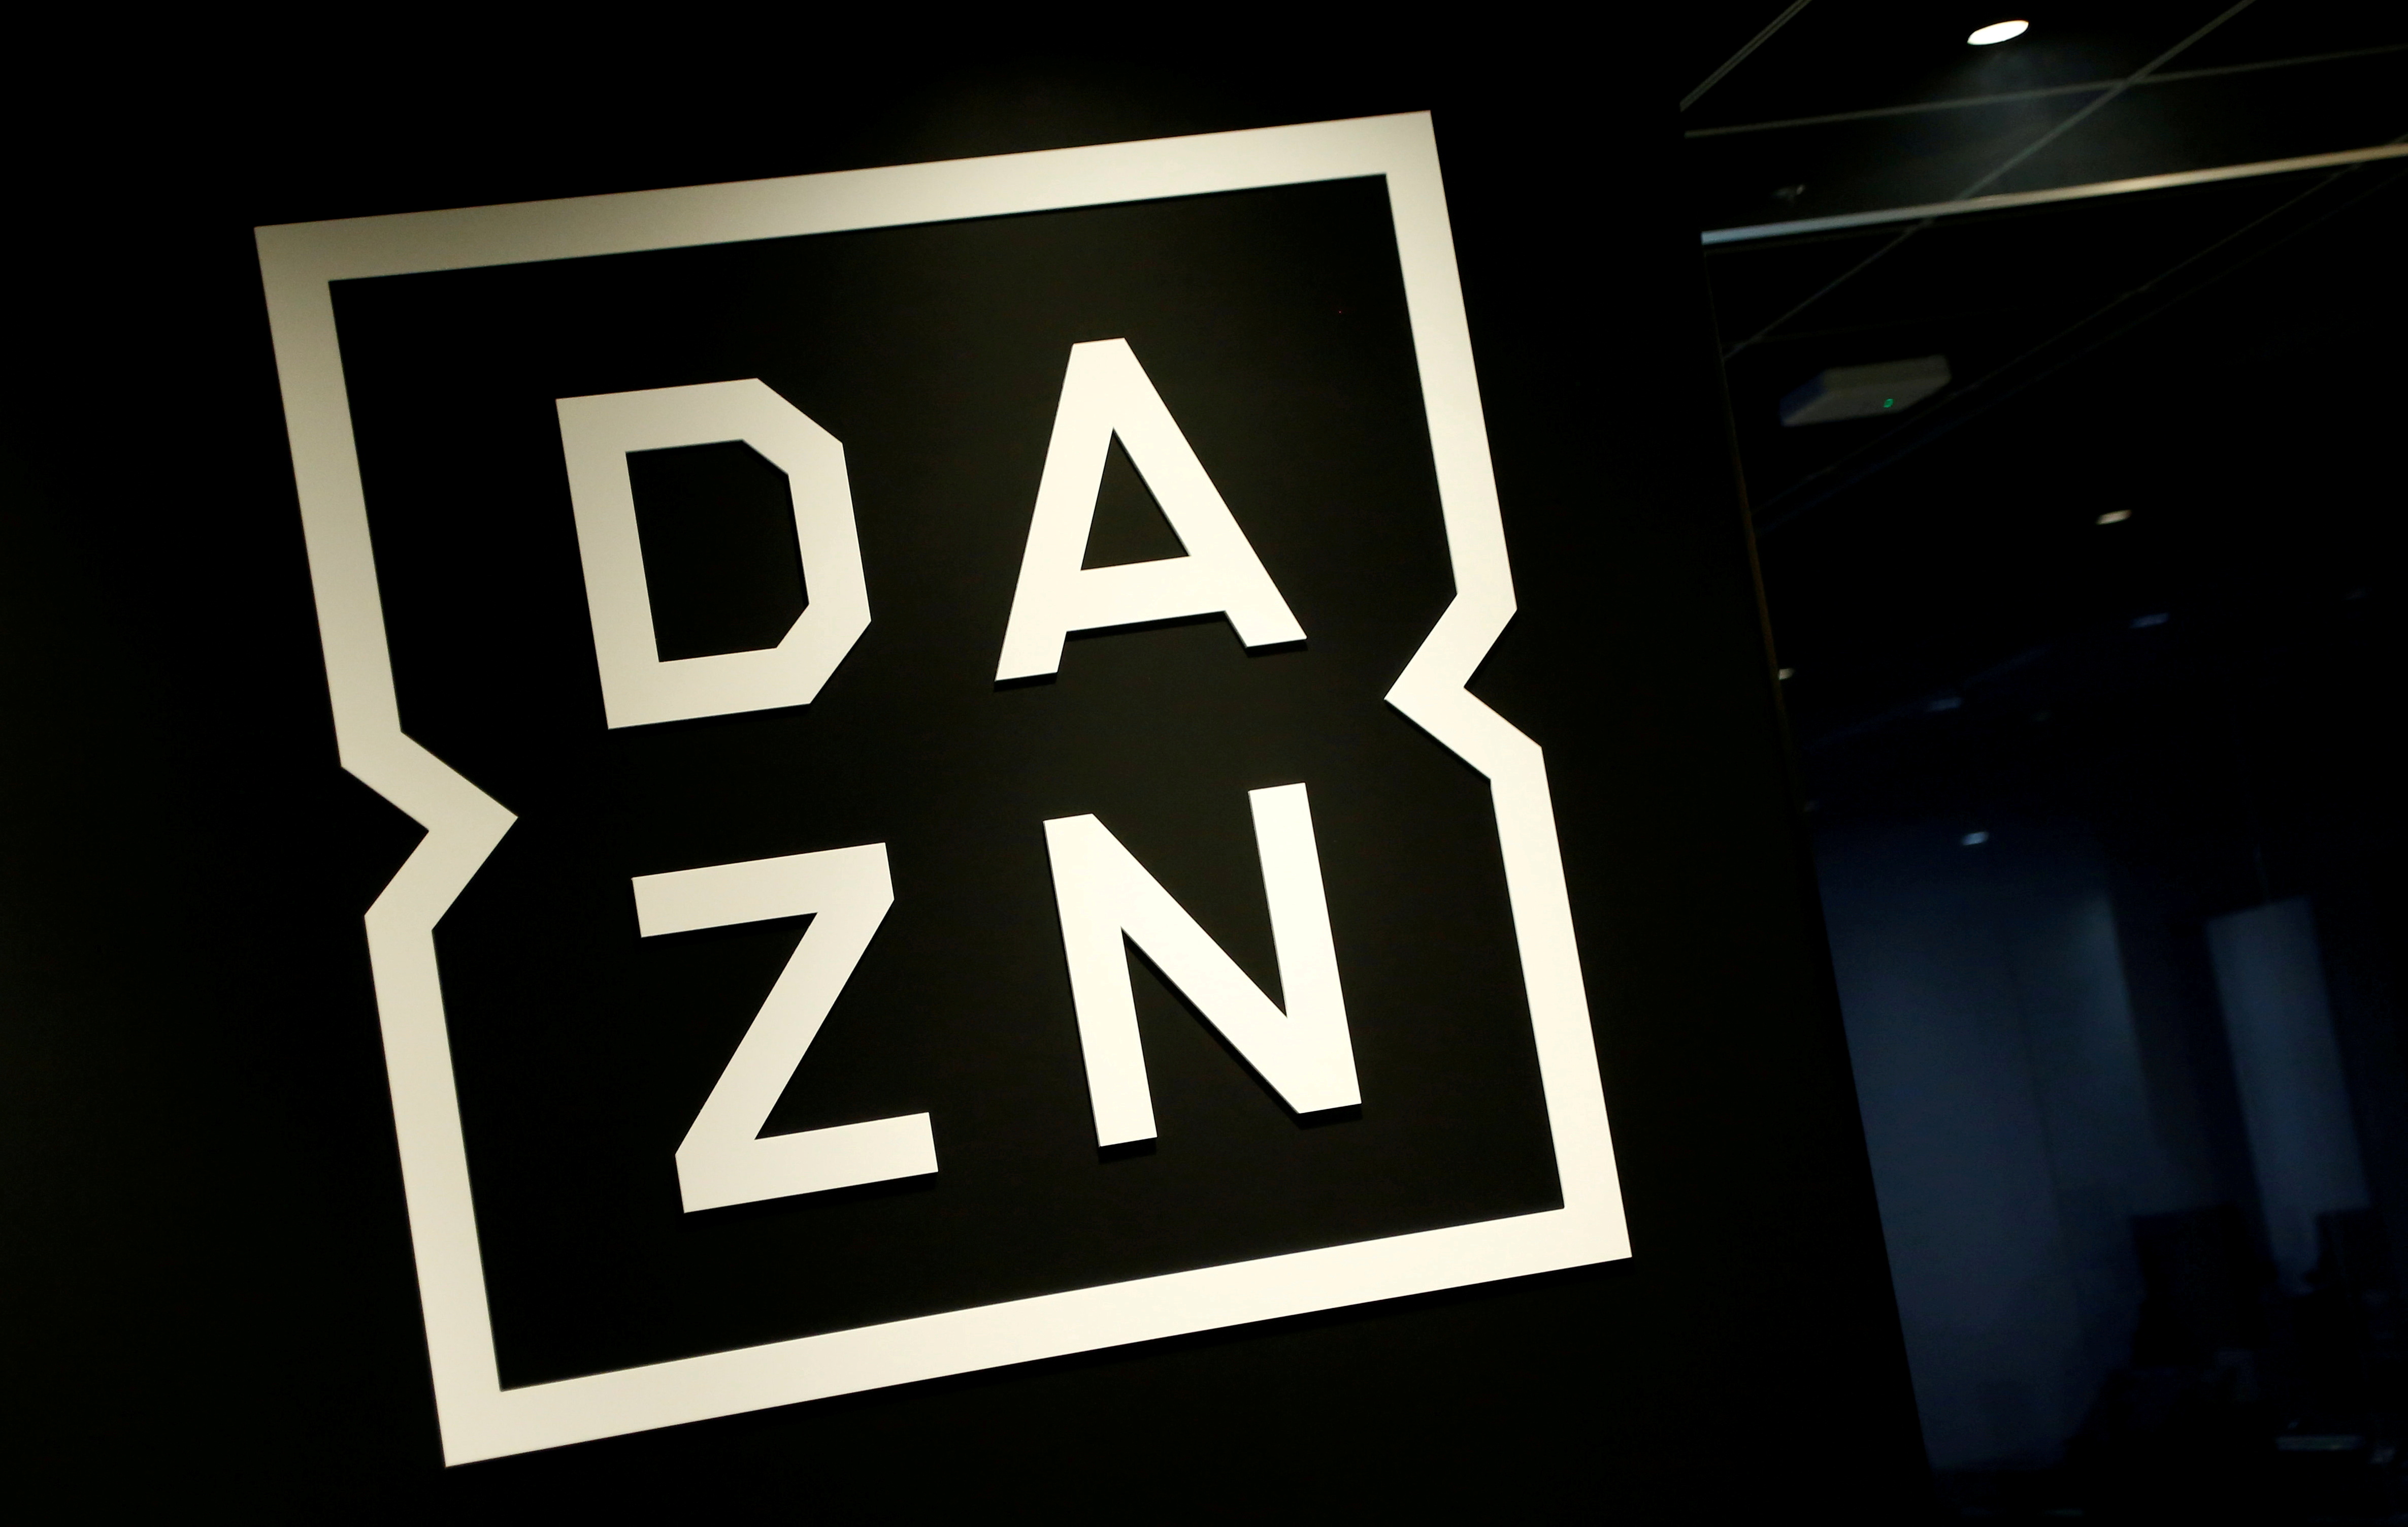 Internet streaming service DAZN's logo is pictured in its office in Tokyo, Japan March 21, 2017. Picture taken on March 21, 2017. REUTERS/Kim Kyung-Hoon